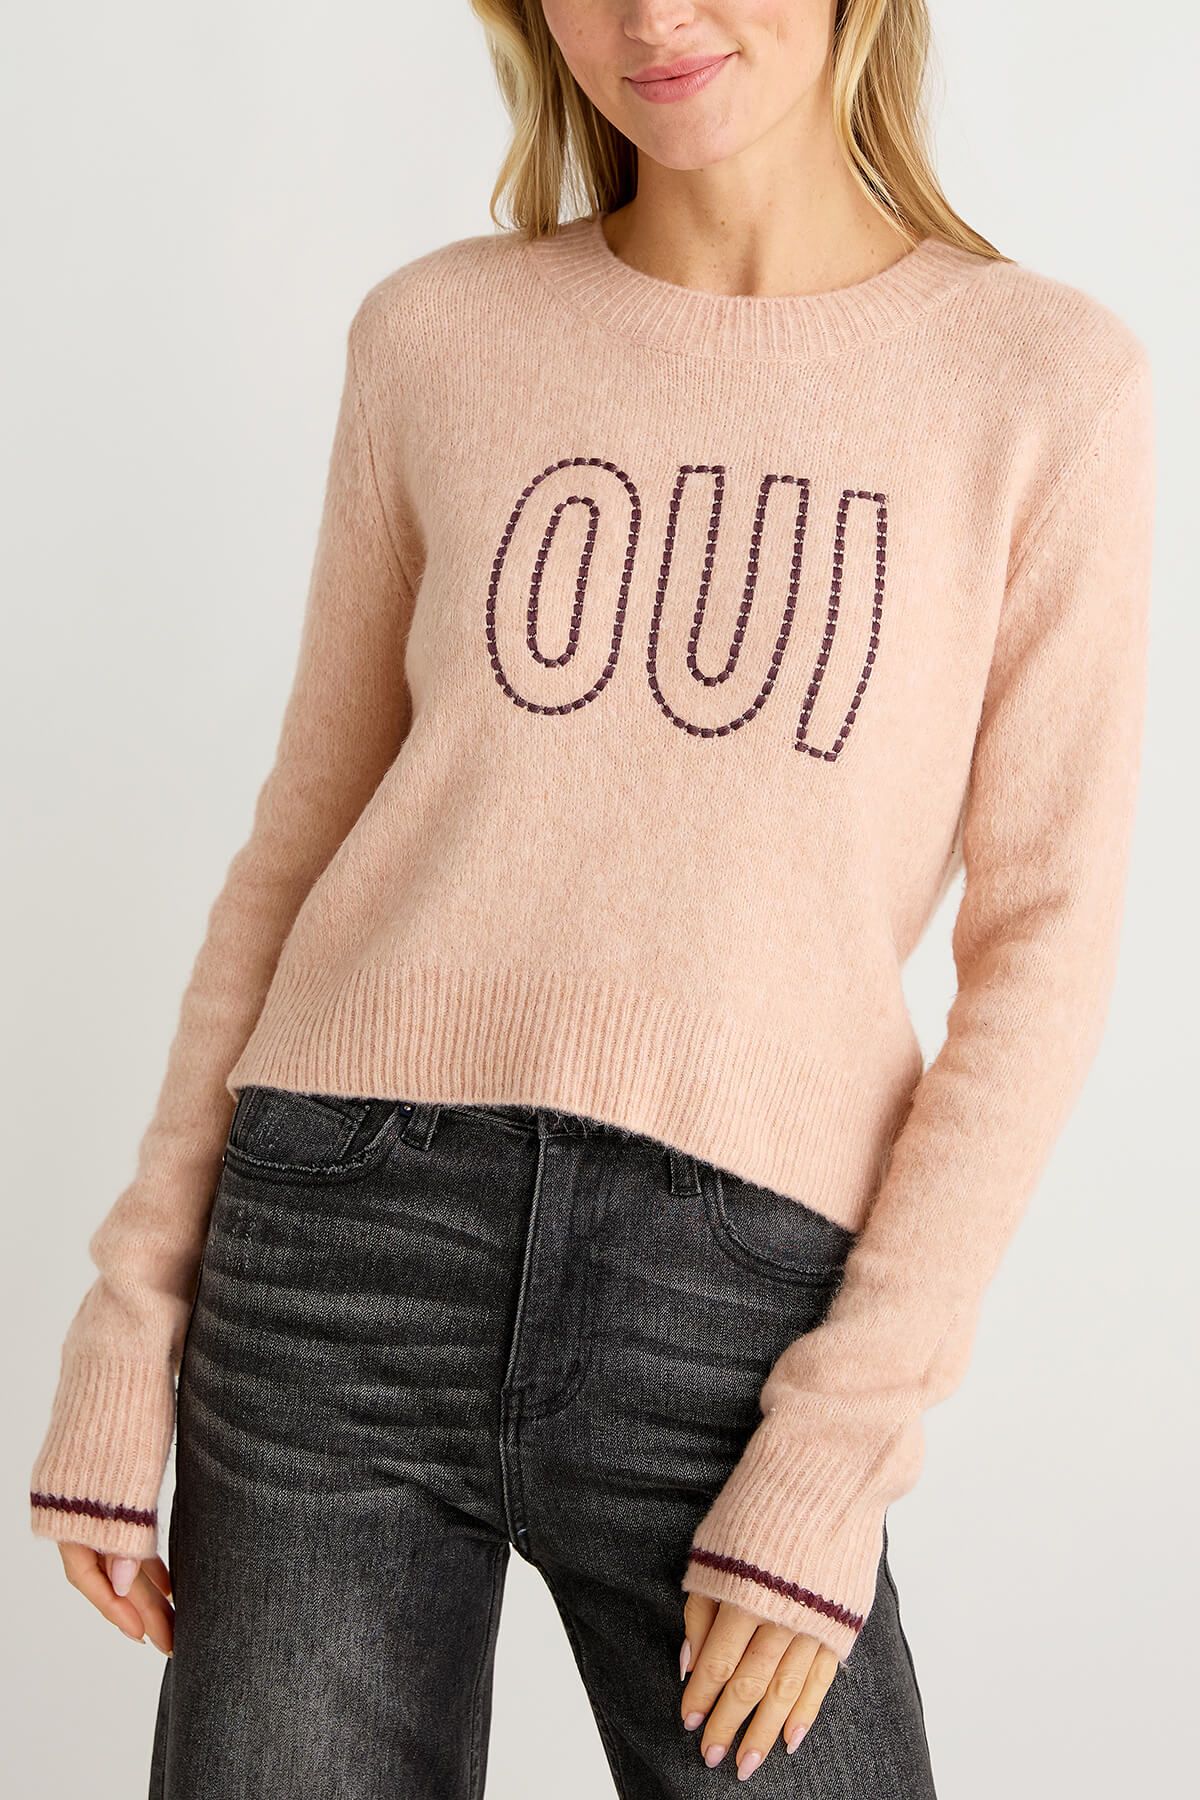 Z Supply Oui Sweater | Social Threads